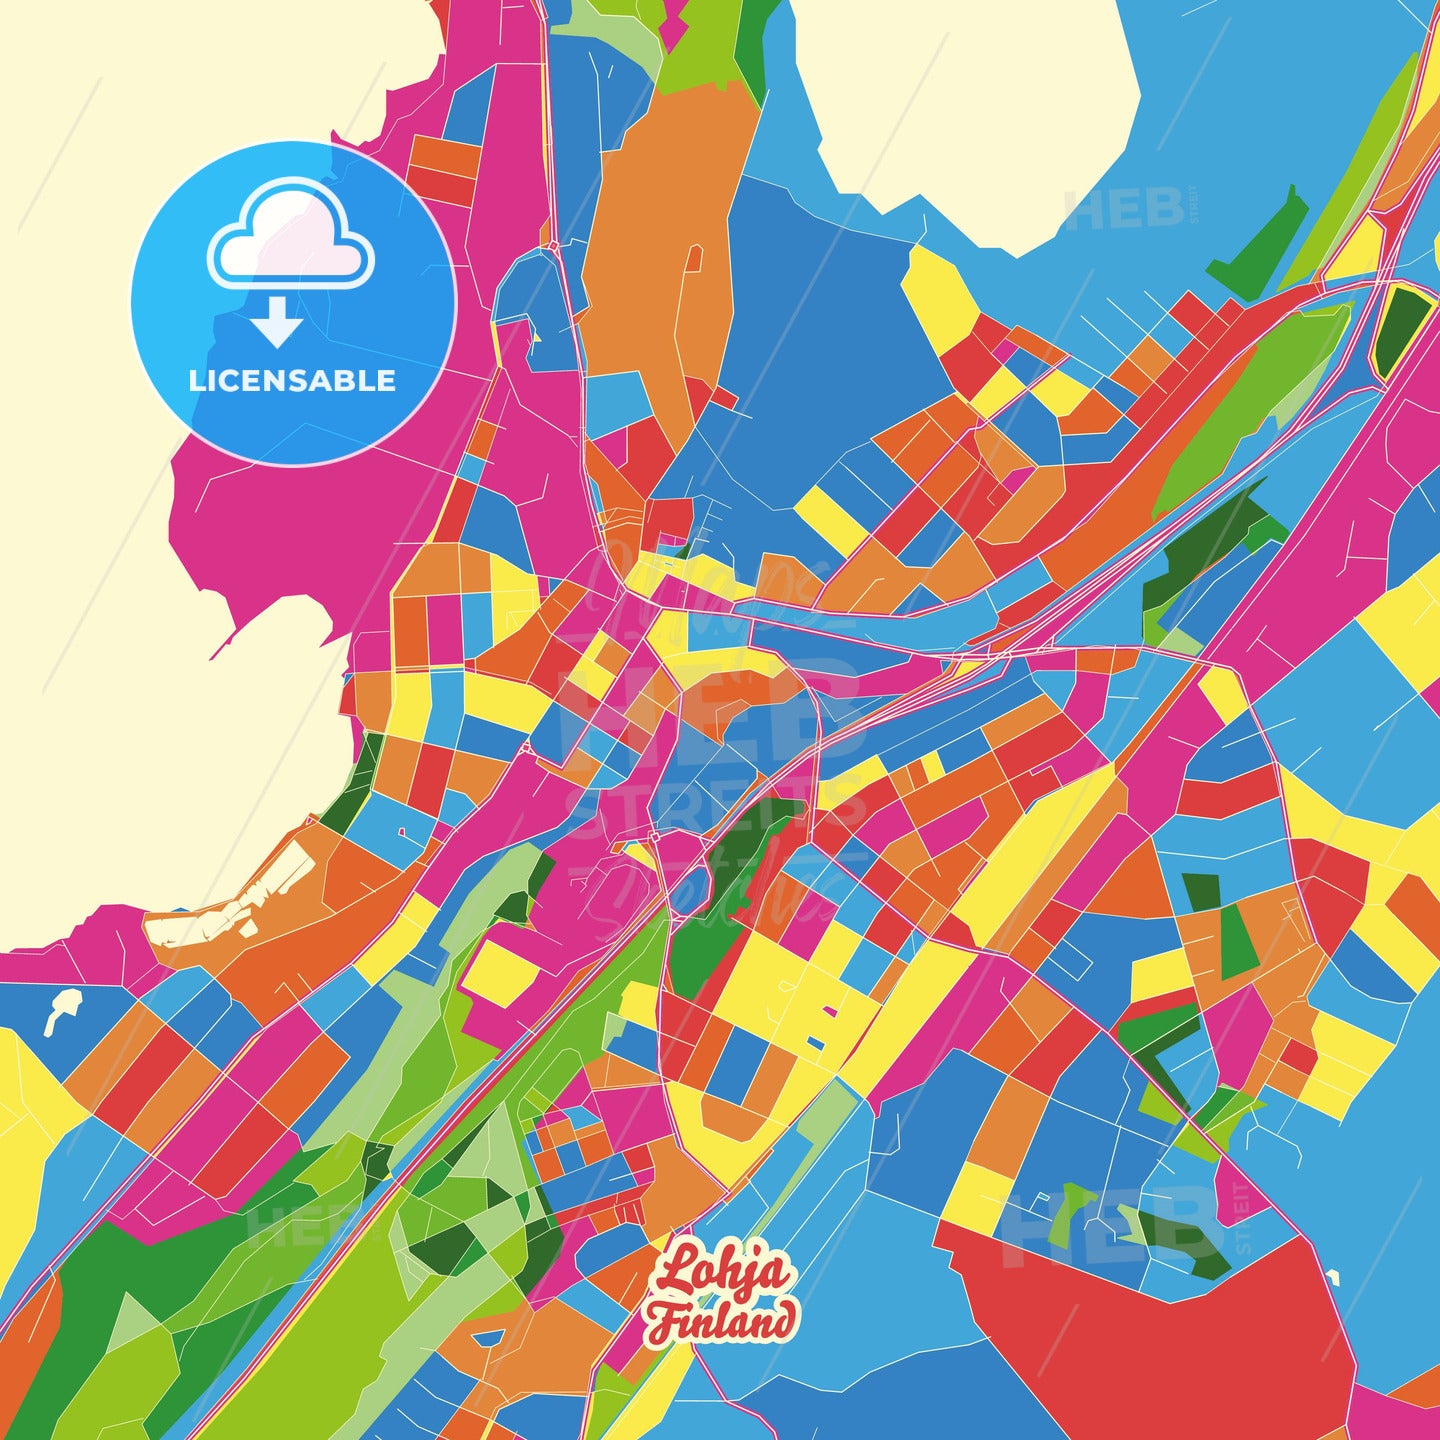 Lohja, Finland Crazy Colorful Street Map Poster Template - HEBSTREITS Sketches